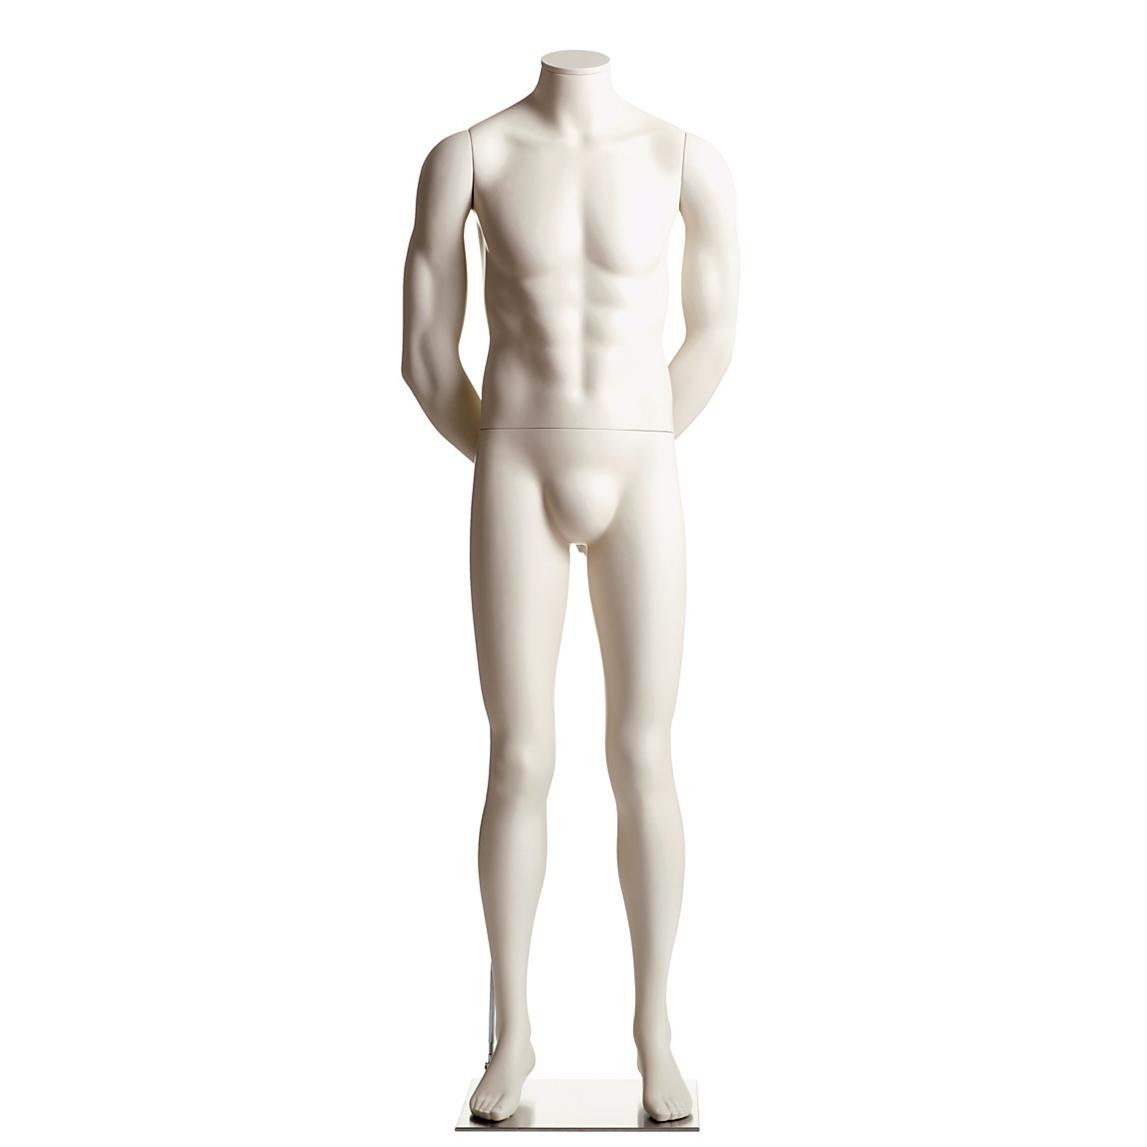 Male Headless Mannequin- Arms Behind Back